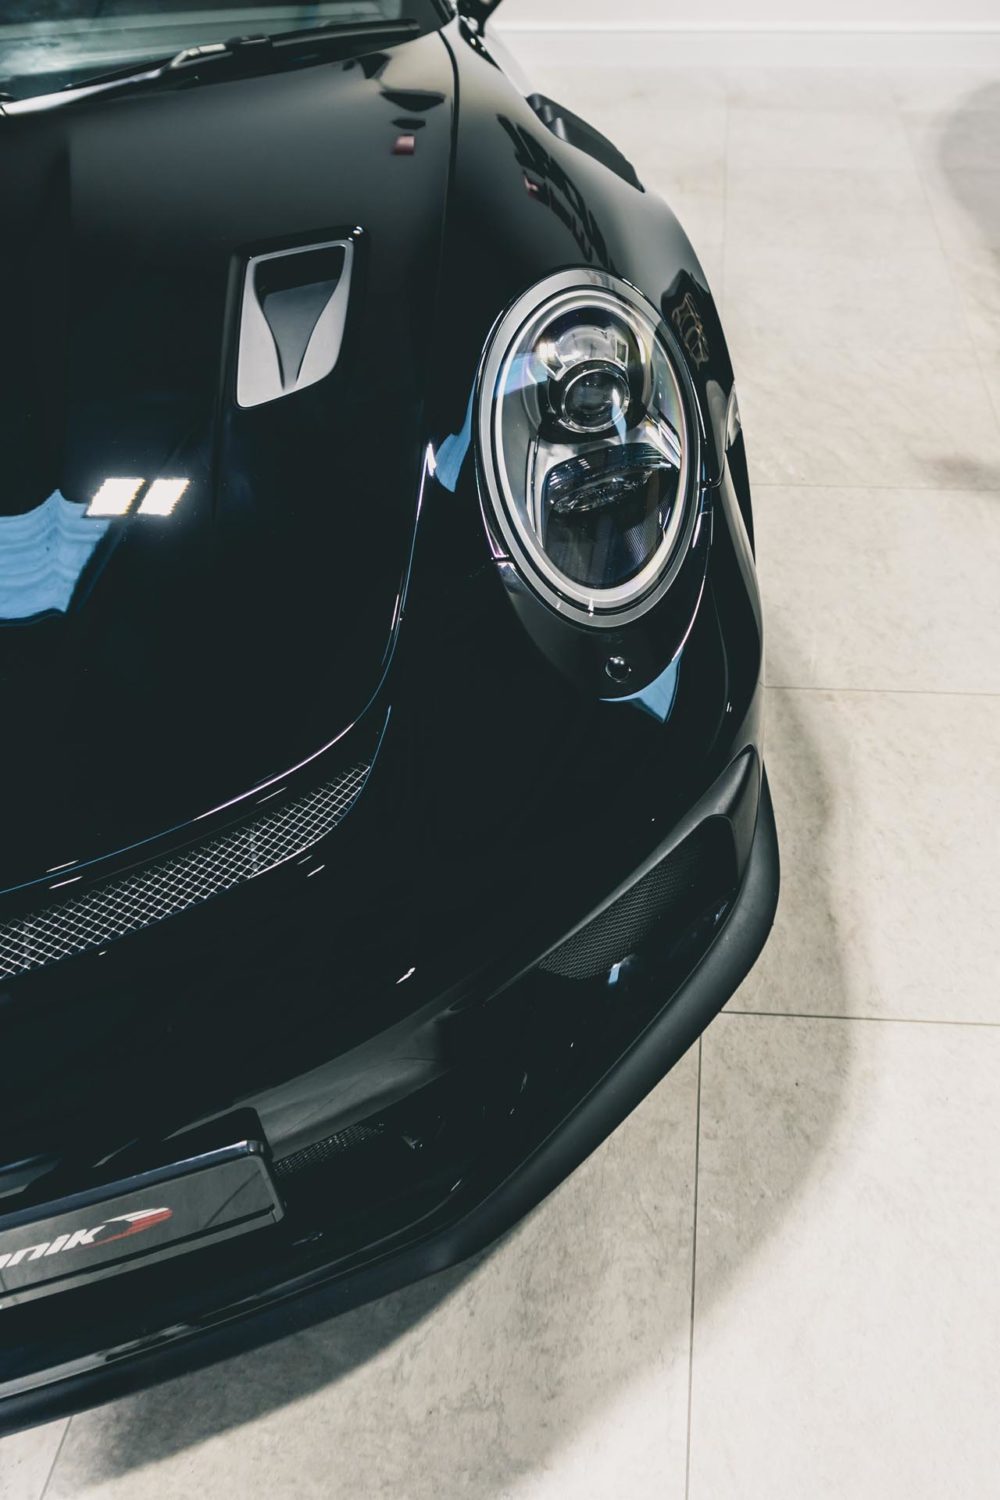 991 gt3rs RPM